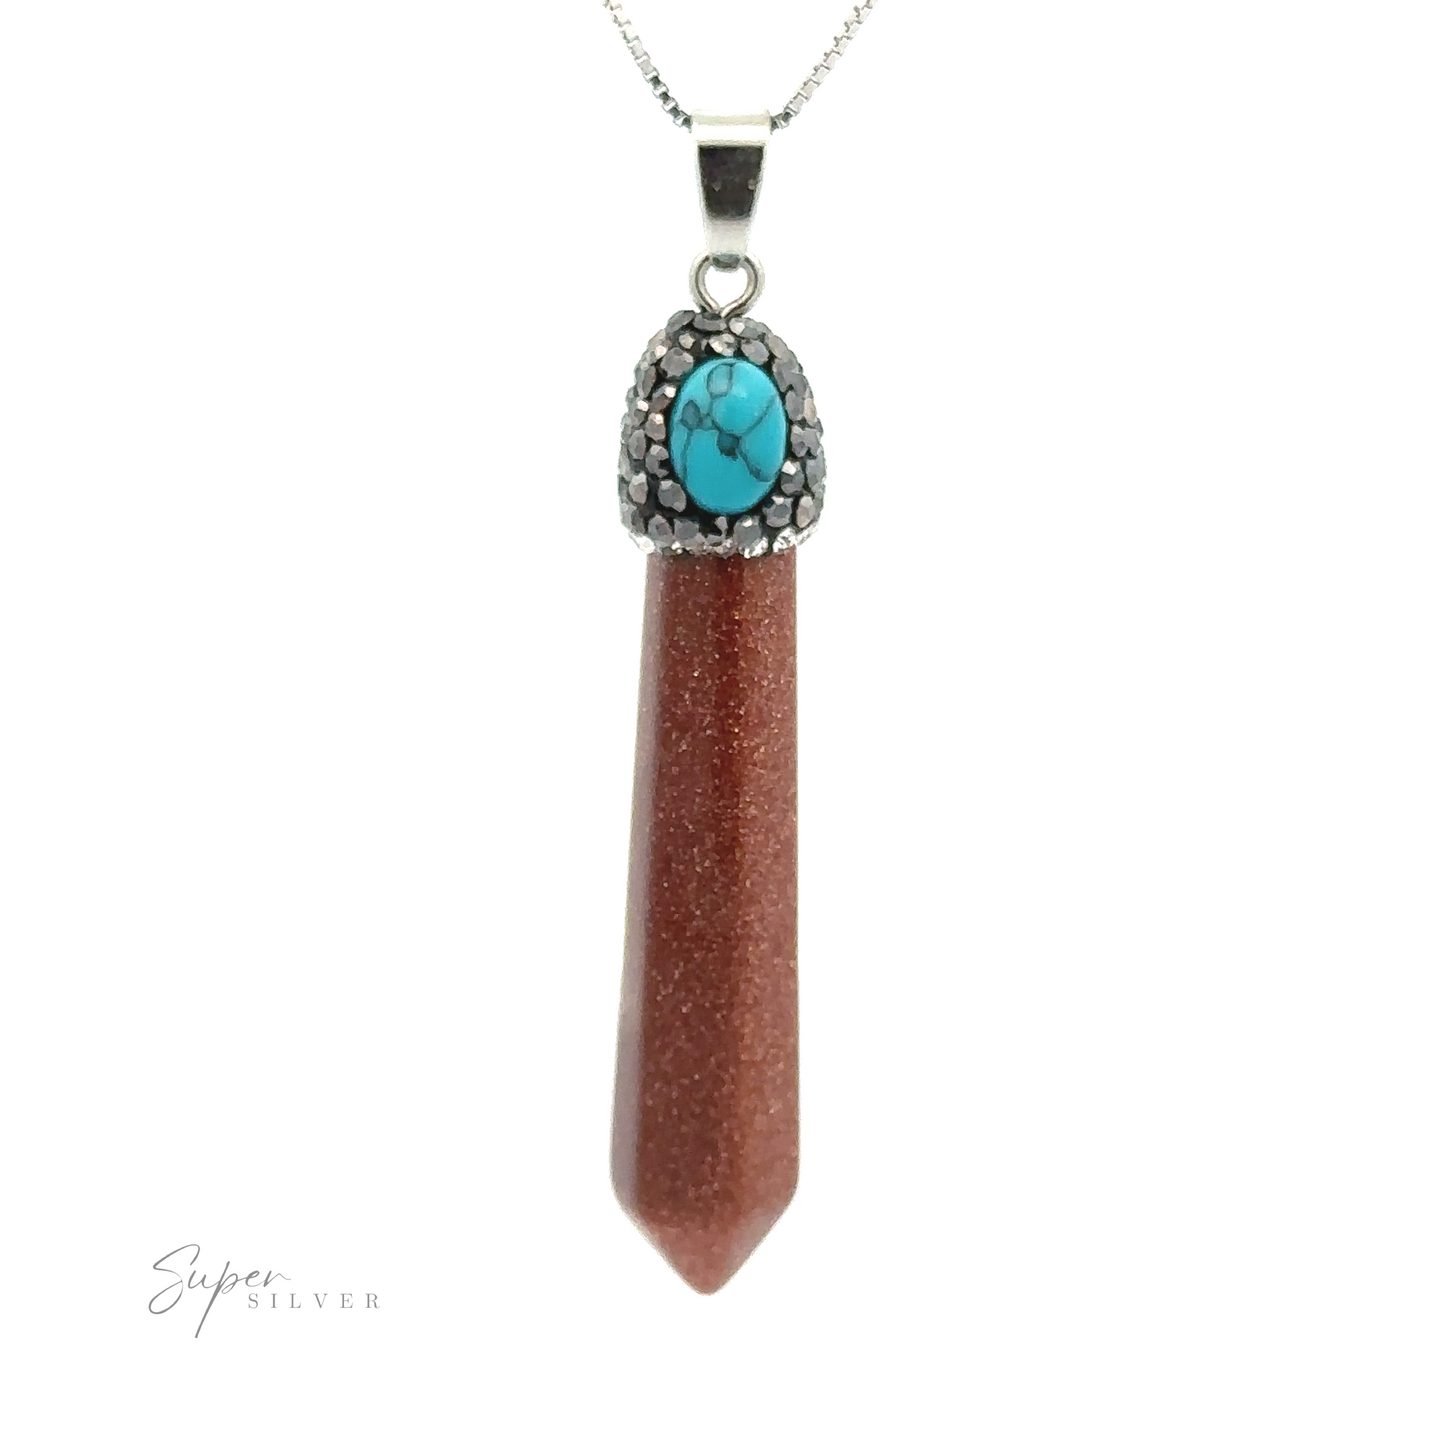 
                  
                    A Stone Obelisk Pendant featuring an obelisk crystal pendant with a polished brown crystal and a decorative silver cap adorned with a small turquoise stone. The chain is a simple silver link design, accented by delicate hematite beads.
                  
                